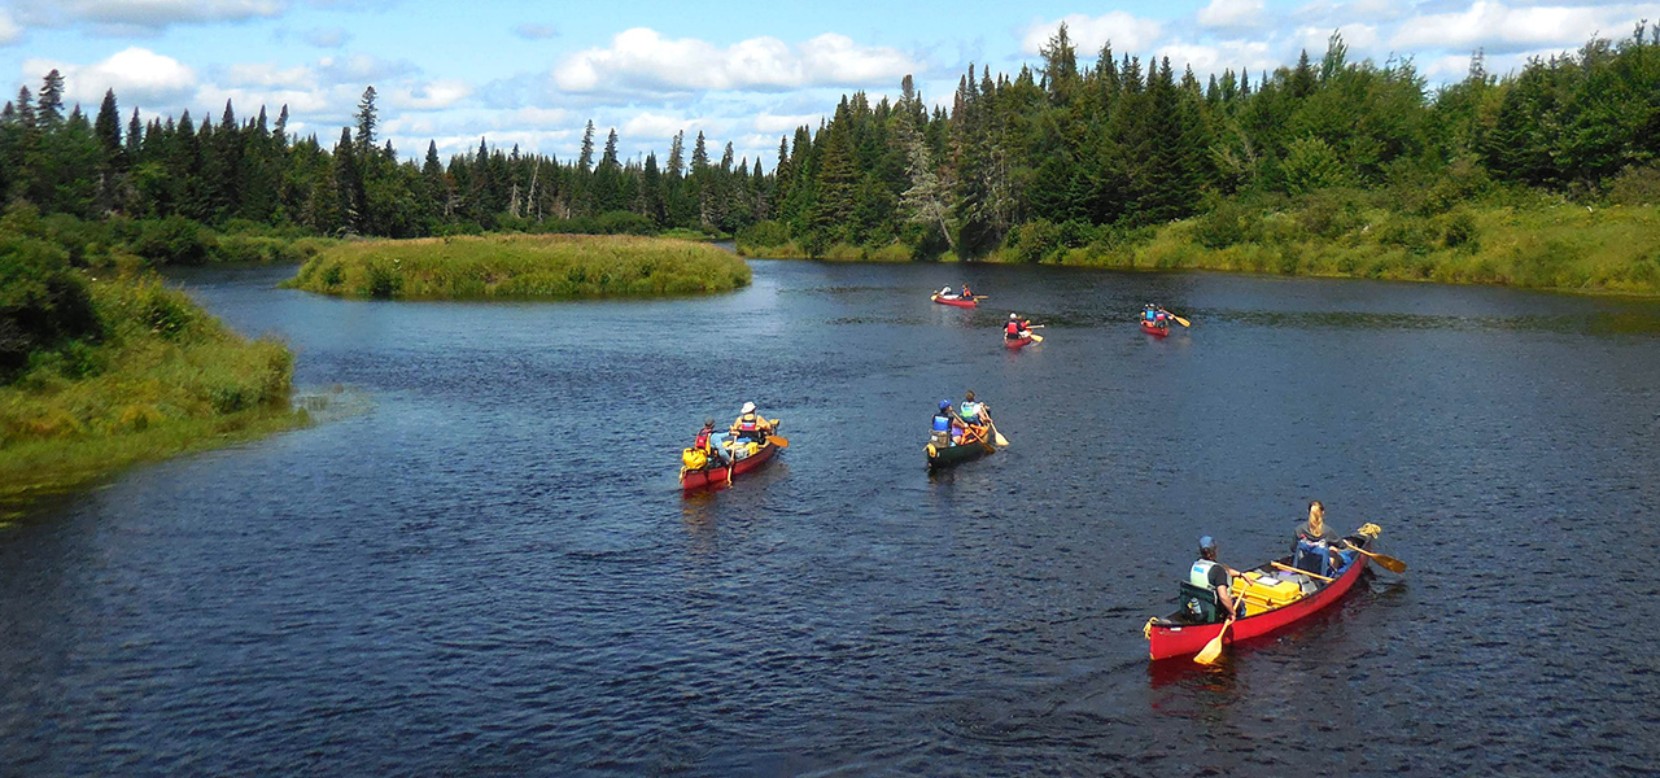 A group of 6 canoes loaded with camping gear and 12 people paddling on calm water on a beautiful day.